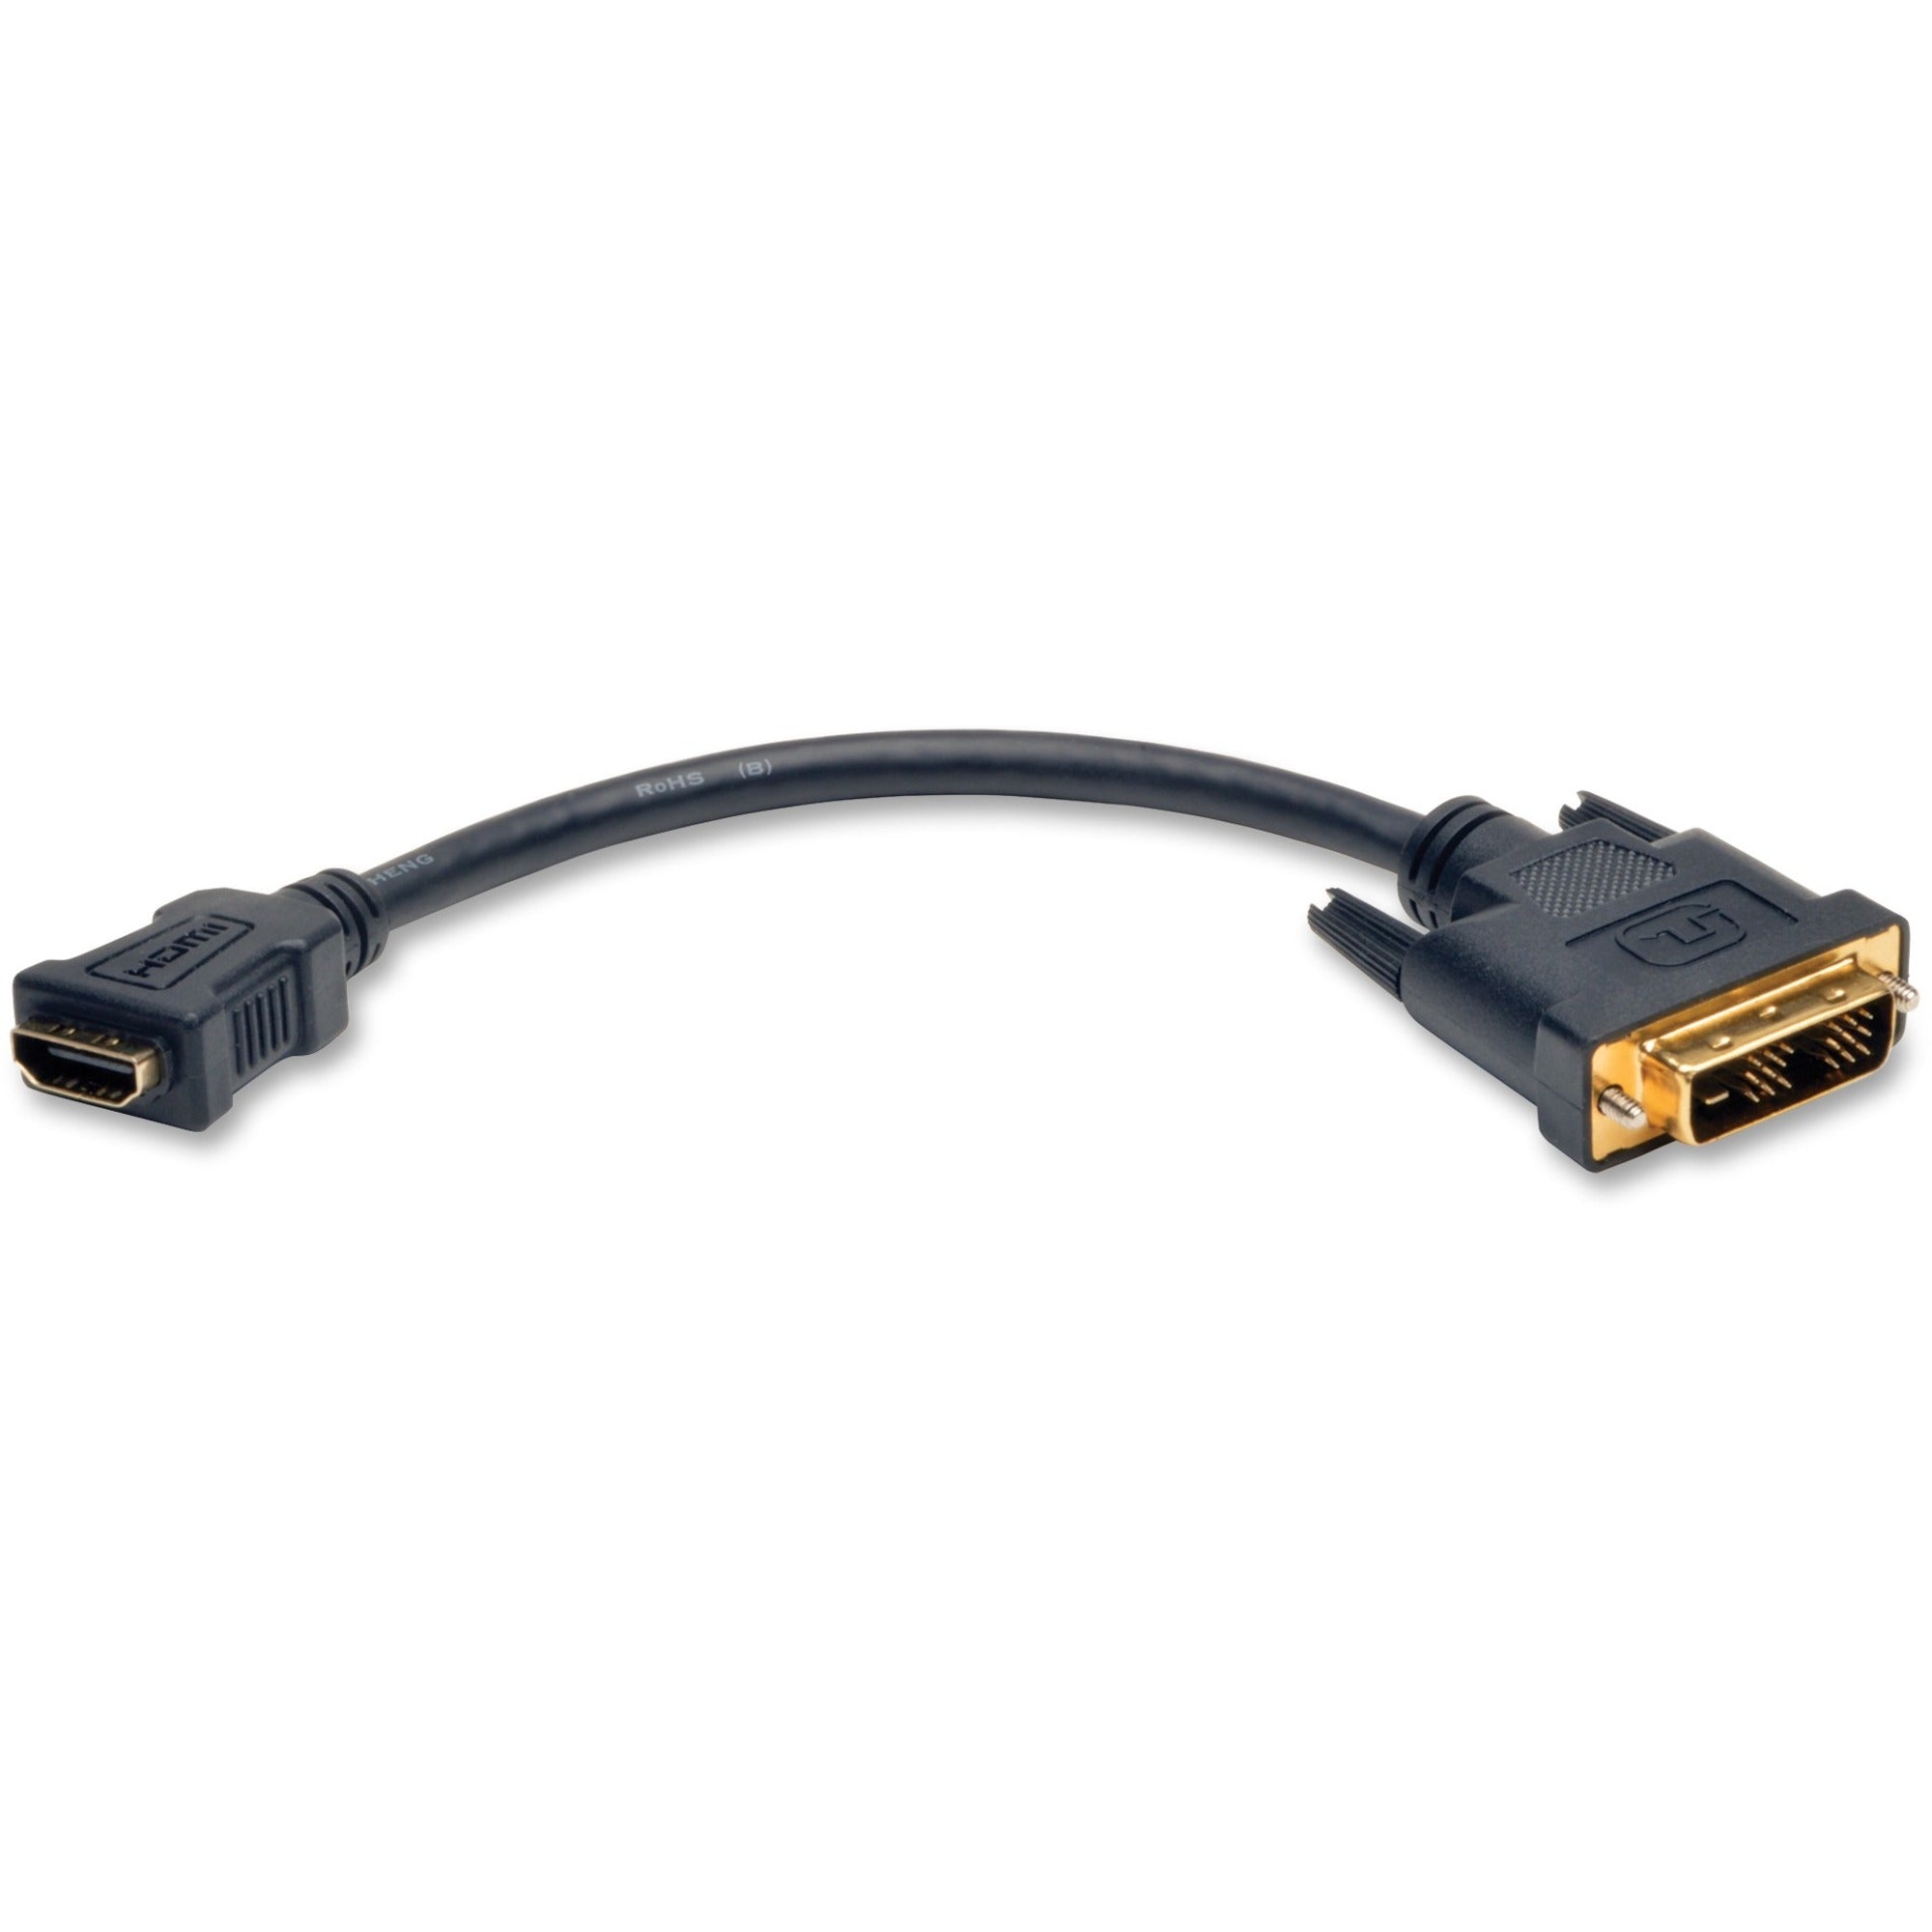 tripp-lite-by-eaton-hdmi-to-dvi-d-adapter-cable-f-m-8-in-203-cm-8-dvi-d-hdmi-video-cable-for-video-device-first-end-1-x-dvi-d-single-link-digital-video-male-second-end-1-x-hdmi-digital-audio-video-female-supports-up-to-1920-x_trpp13008n - 1